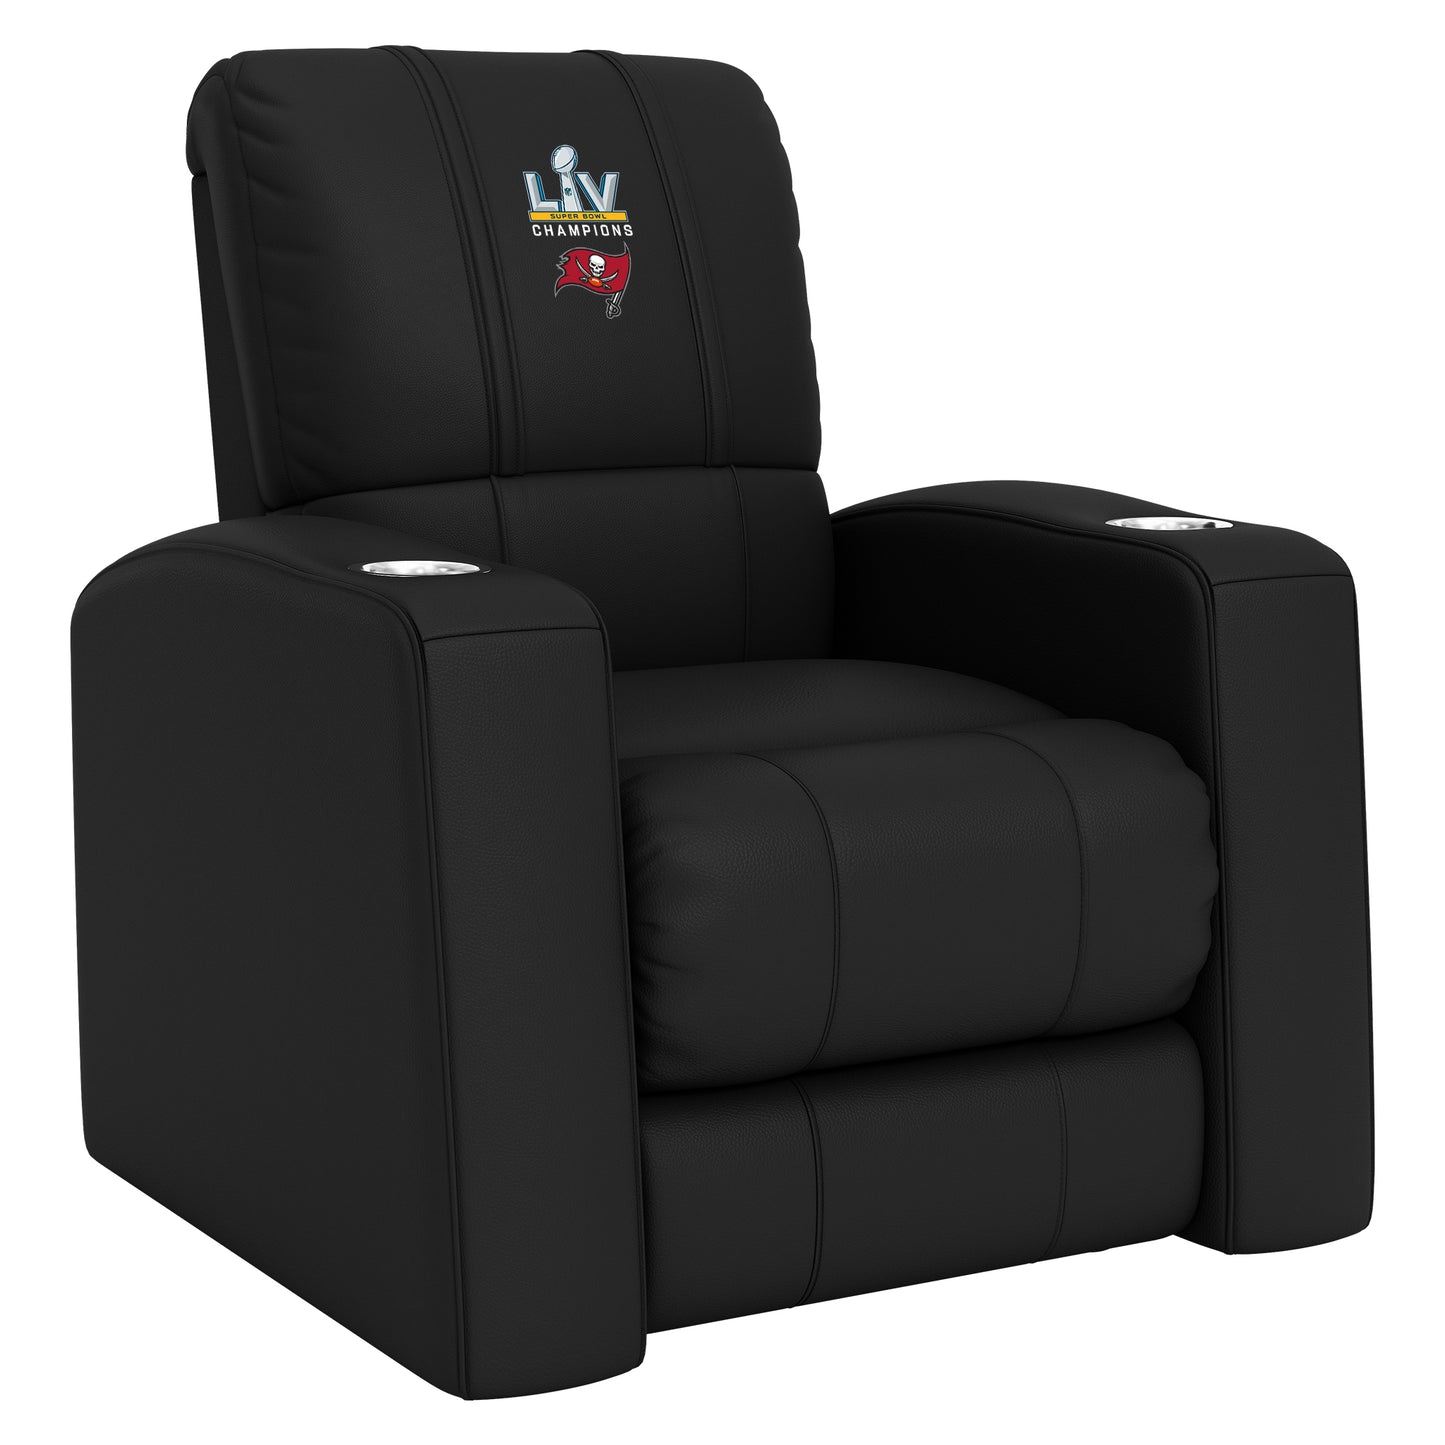 Tampa Bay Buccaneers Primary Super Bowl LV Logo Relax Home Theater Recliner